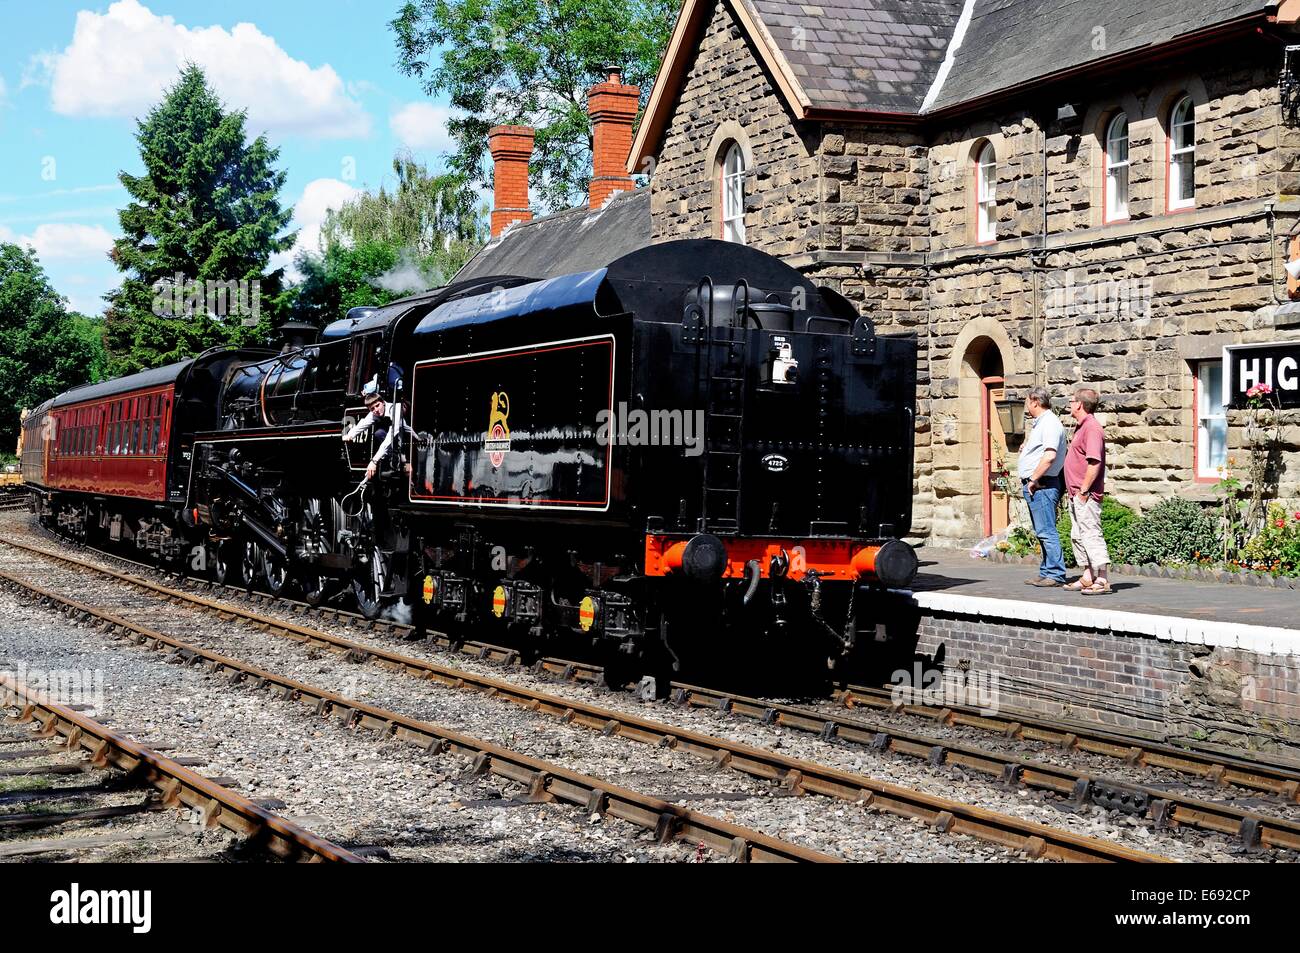 Steam Locomotive British Rail Standard Class 5 4-6-0 number 73129 with a crew member ready for the token exchange, Highley. Stock Photo